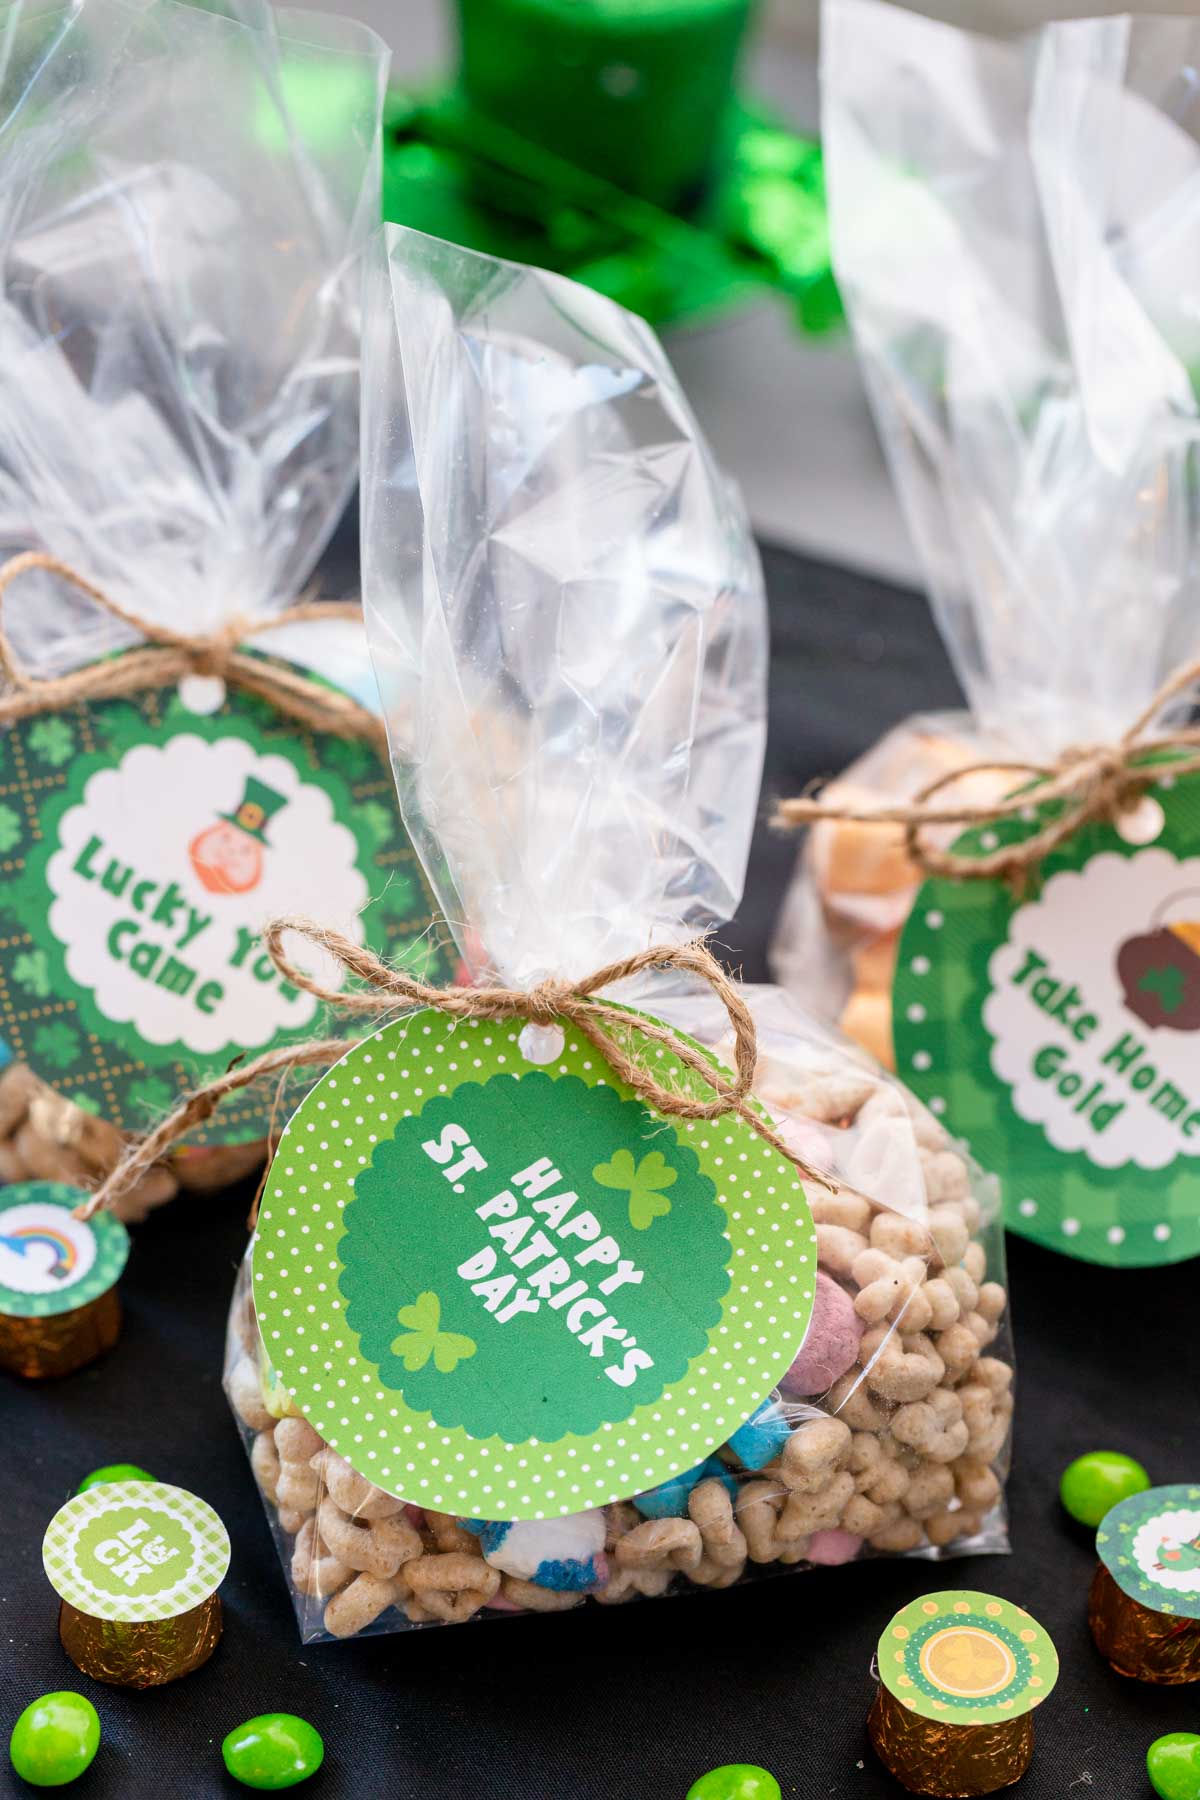 Lucky charms in a bag with a St. Patrick's Day tag